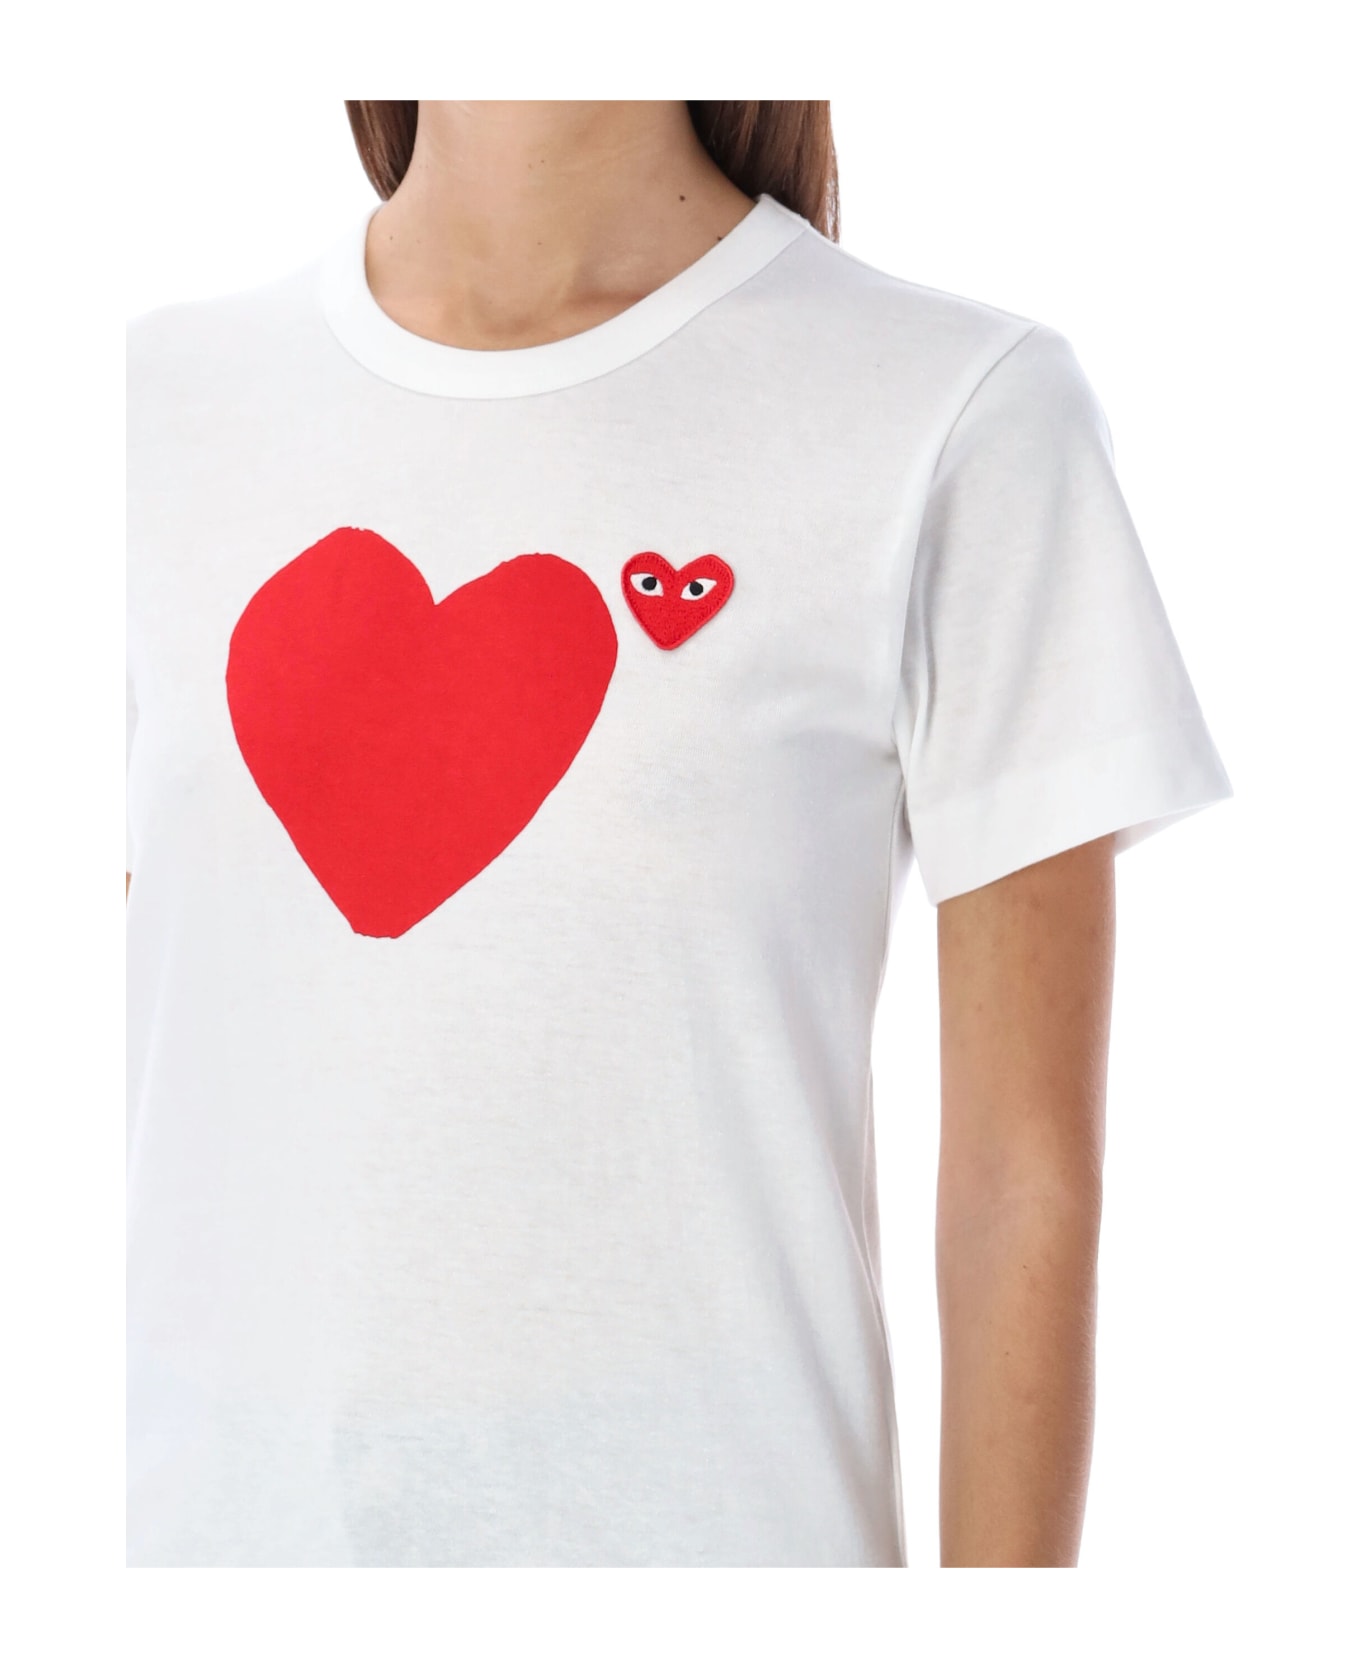 Comme des Garçons Play Big Red Heart T-shirt - WHITE RED Tシャツ